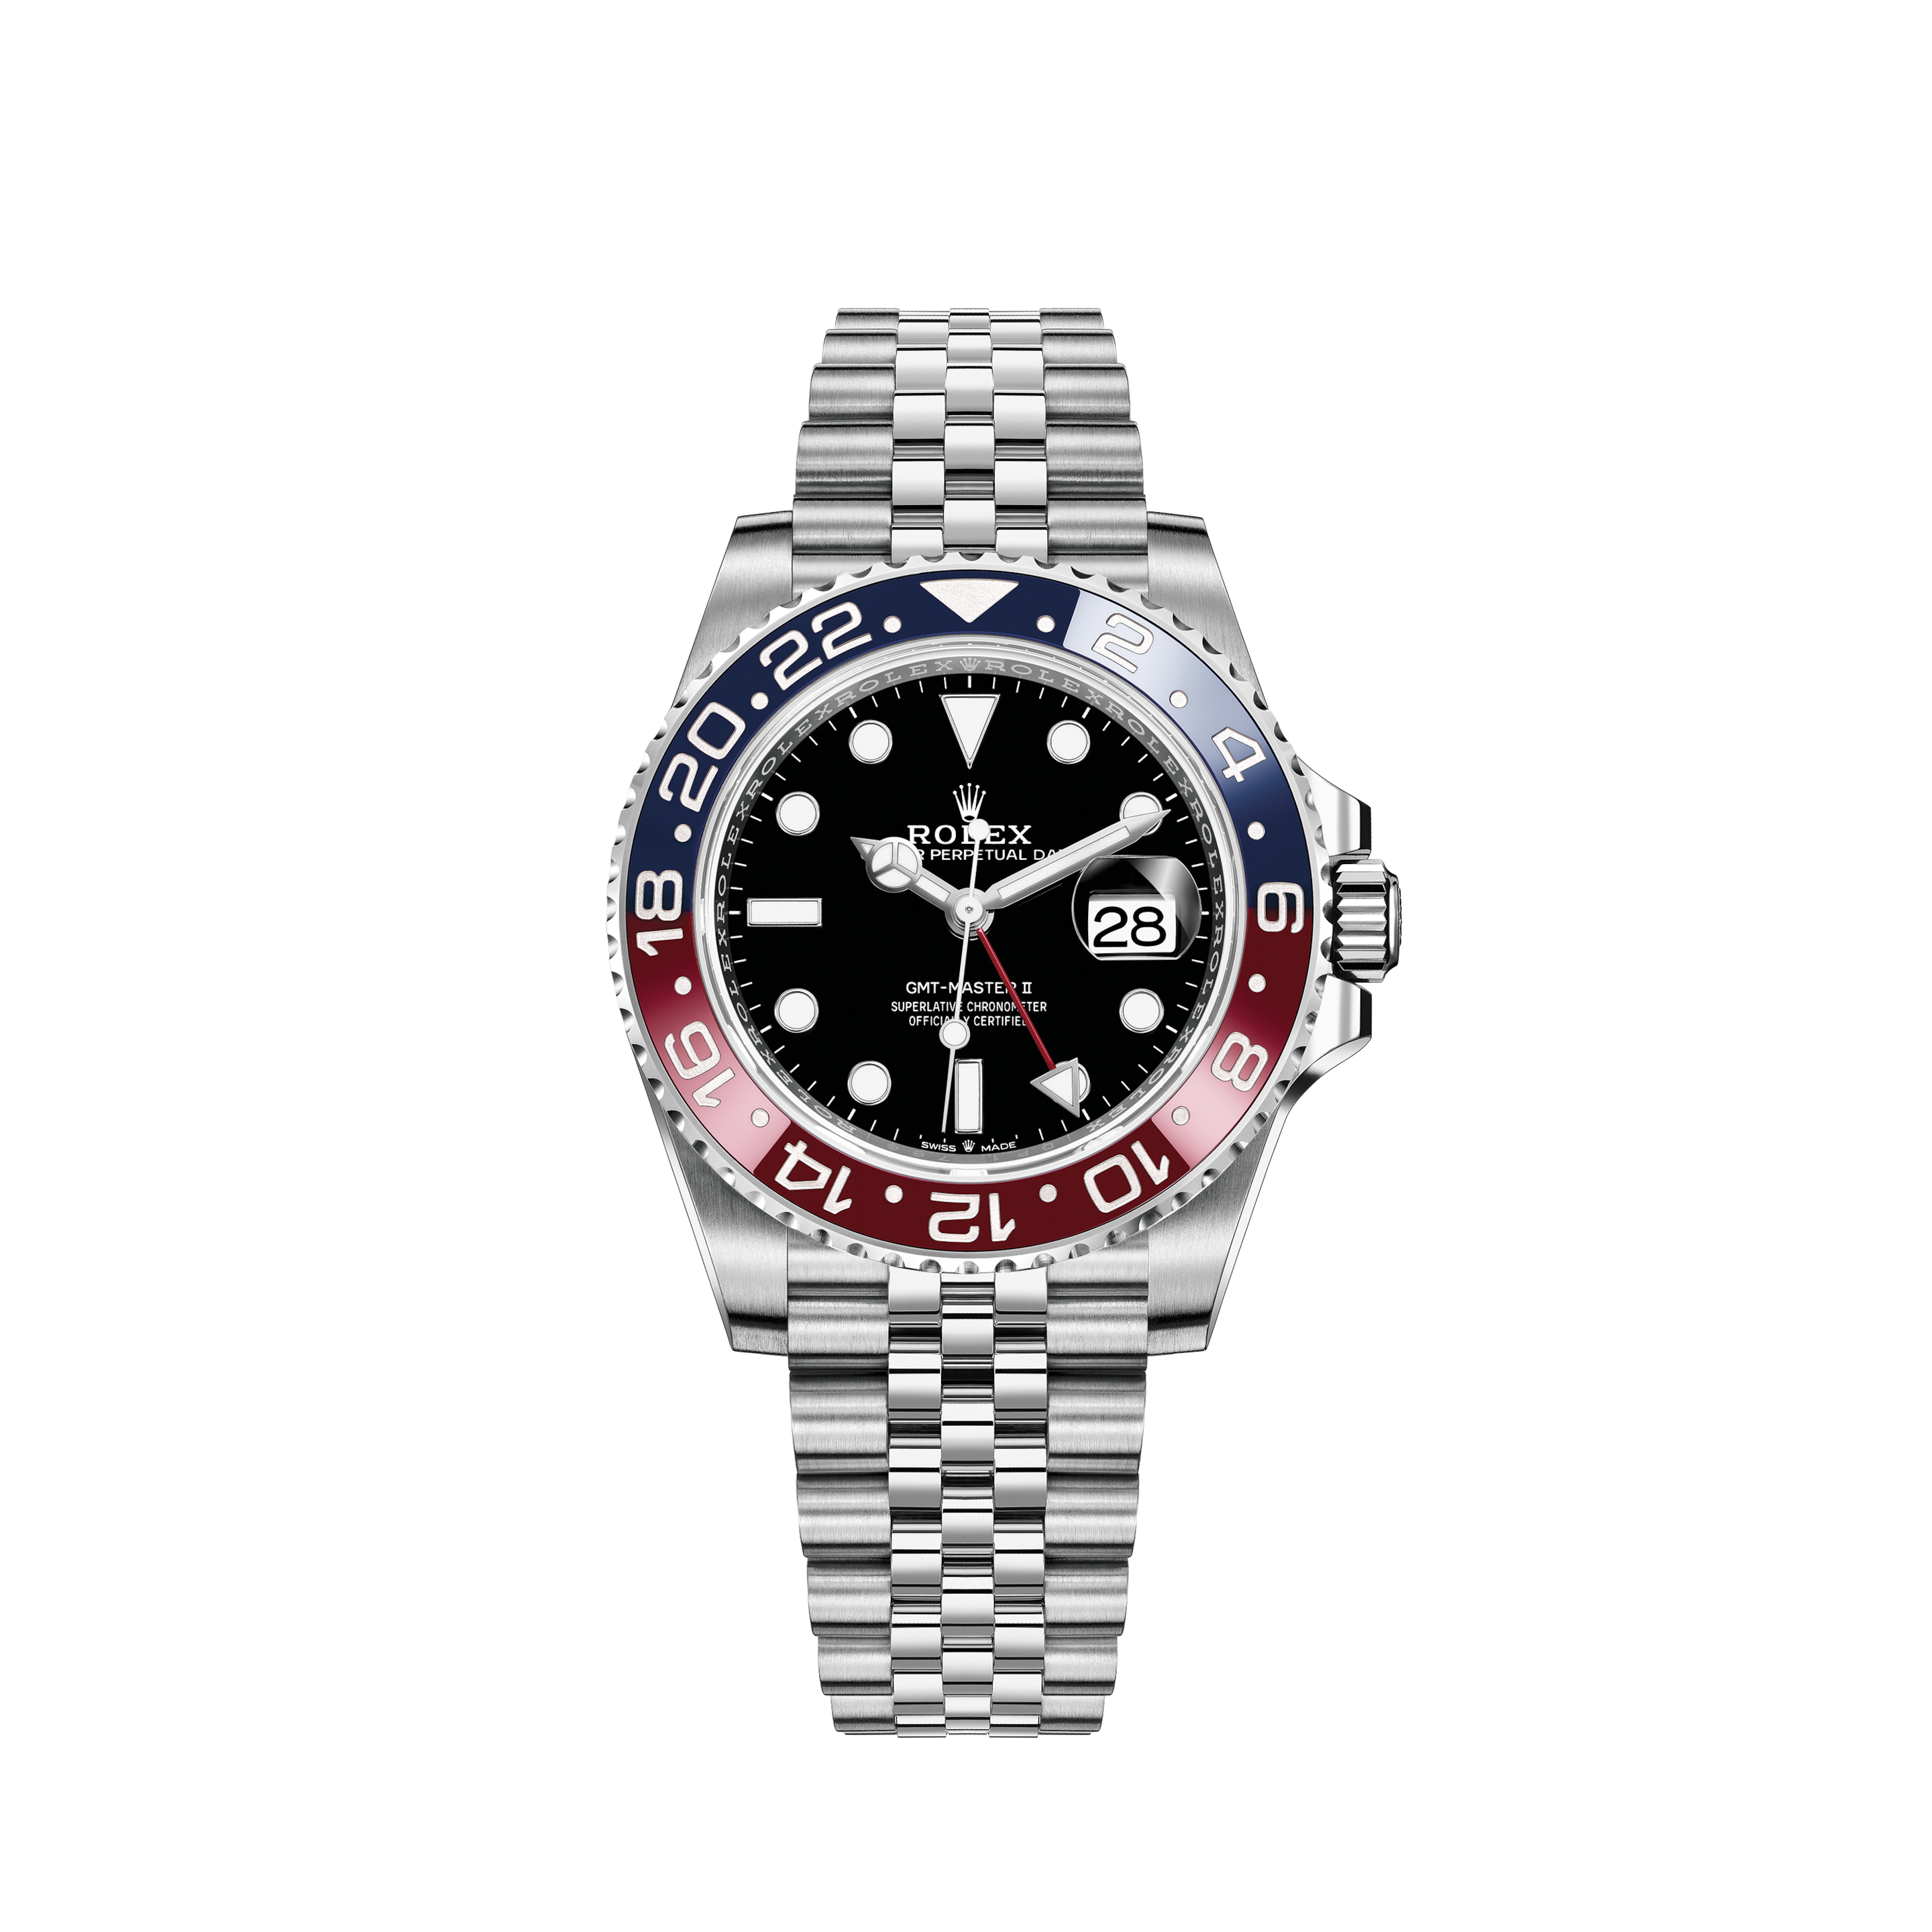 Rolex | Vintage Submariner Date, ref.1680, from year 1978Rolex | Vintage Submariner Ref.5512, 4 Lines Dial, with Service, from year 1968